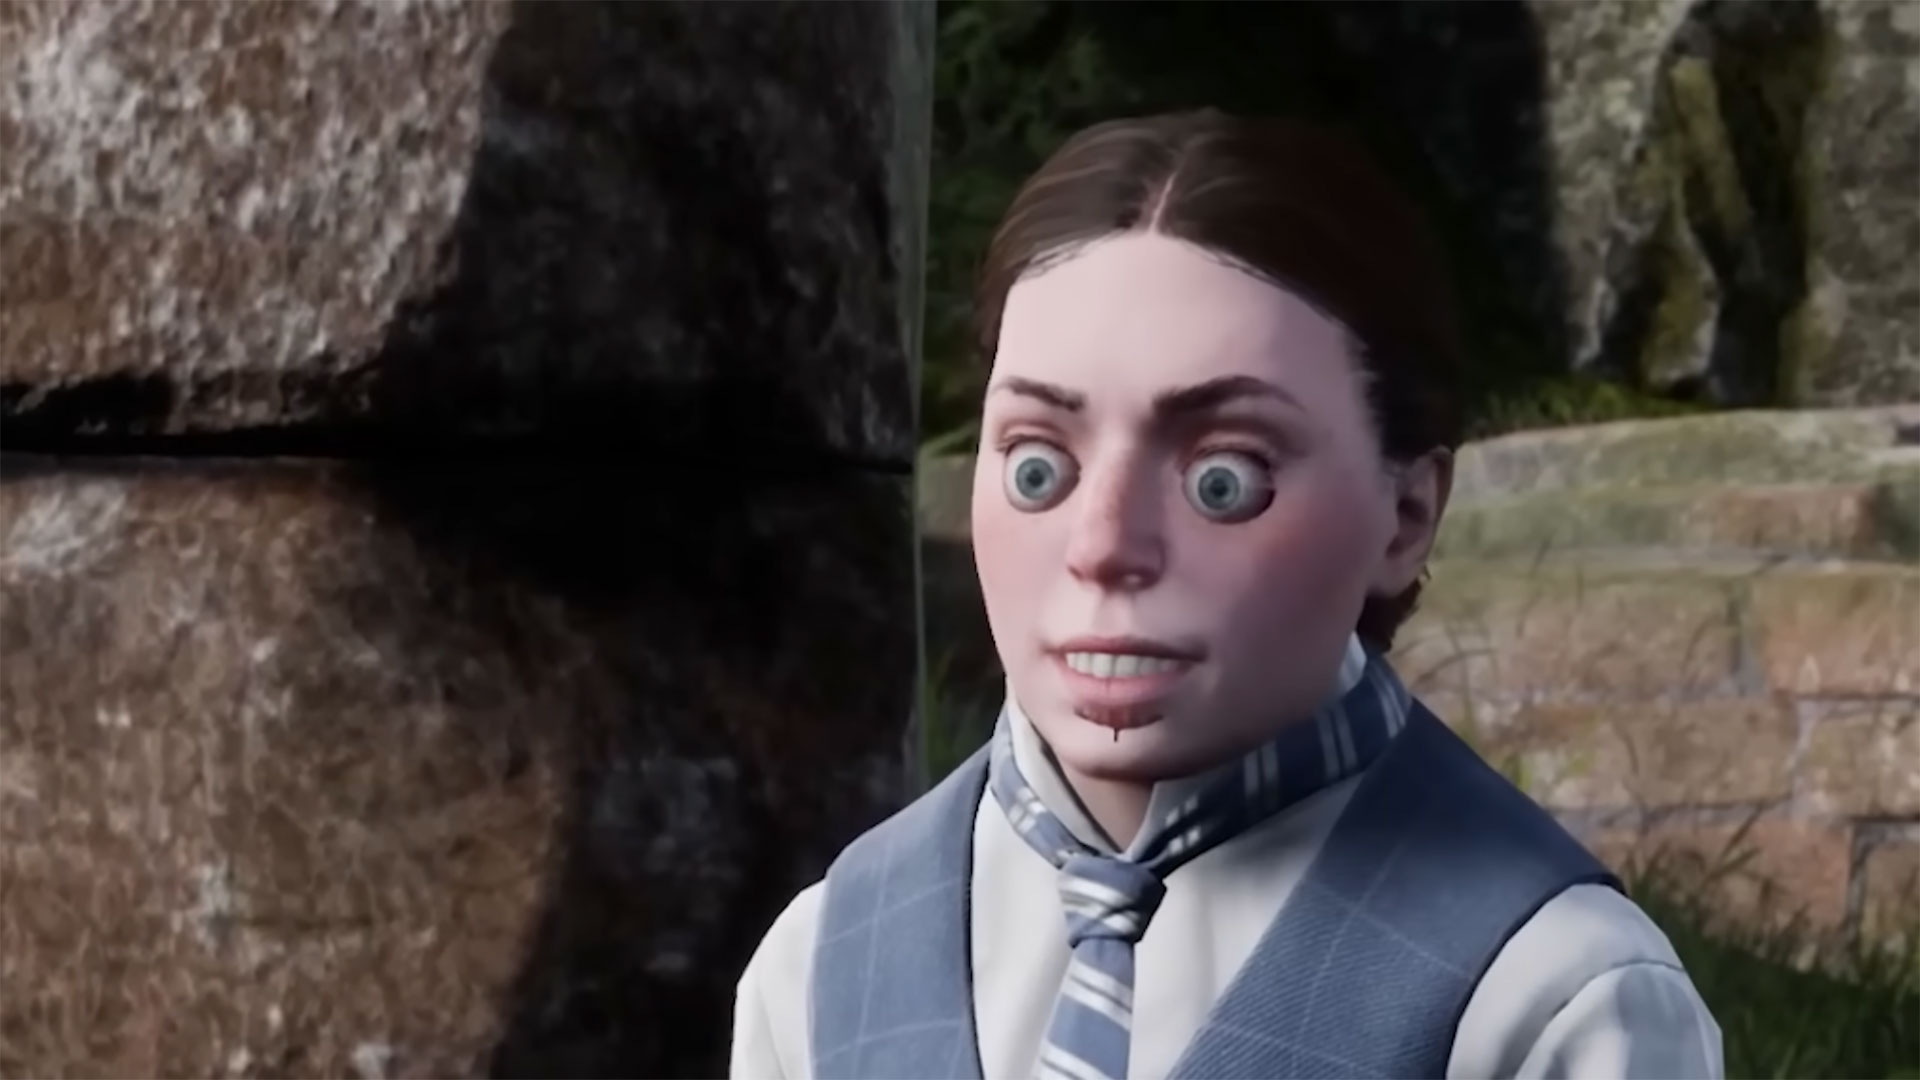 Hogwarts Legacy developers have released a blooper reel for their game